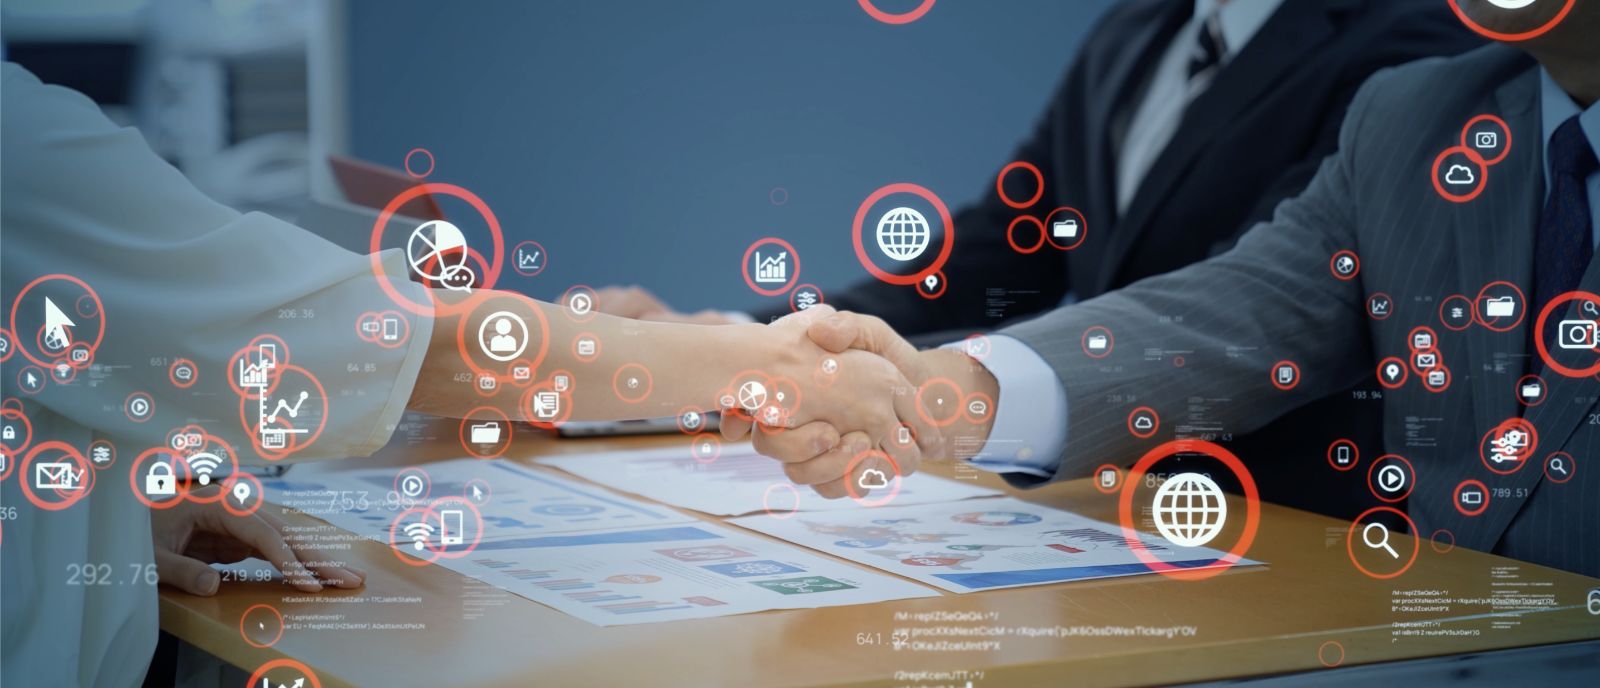 Business handshake over a table with charts and documents, surrounded by digital icons representing technology and data, symbolizing a tech-driven business deal